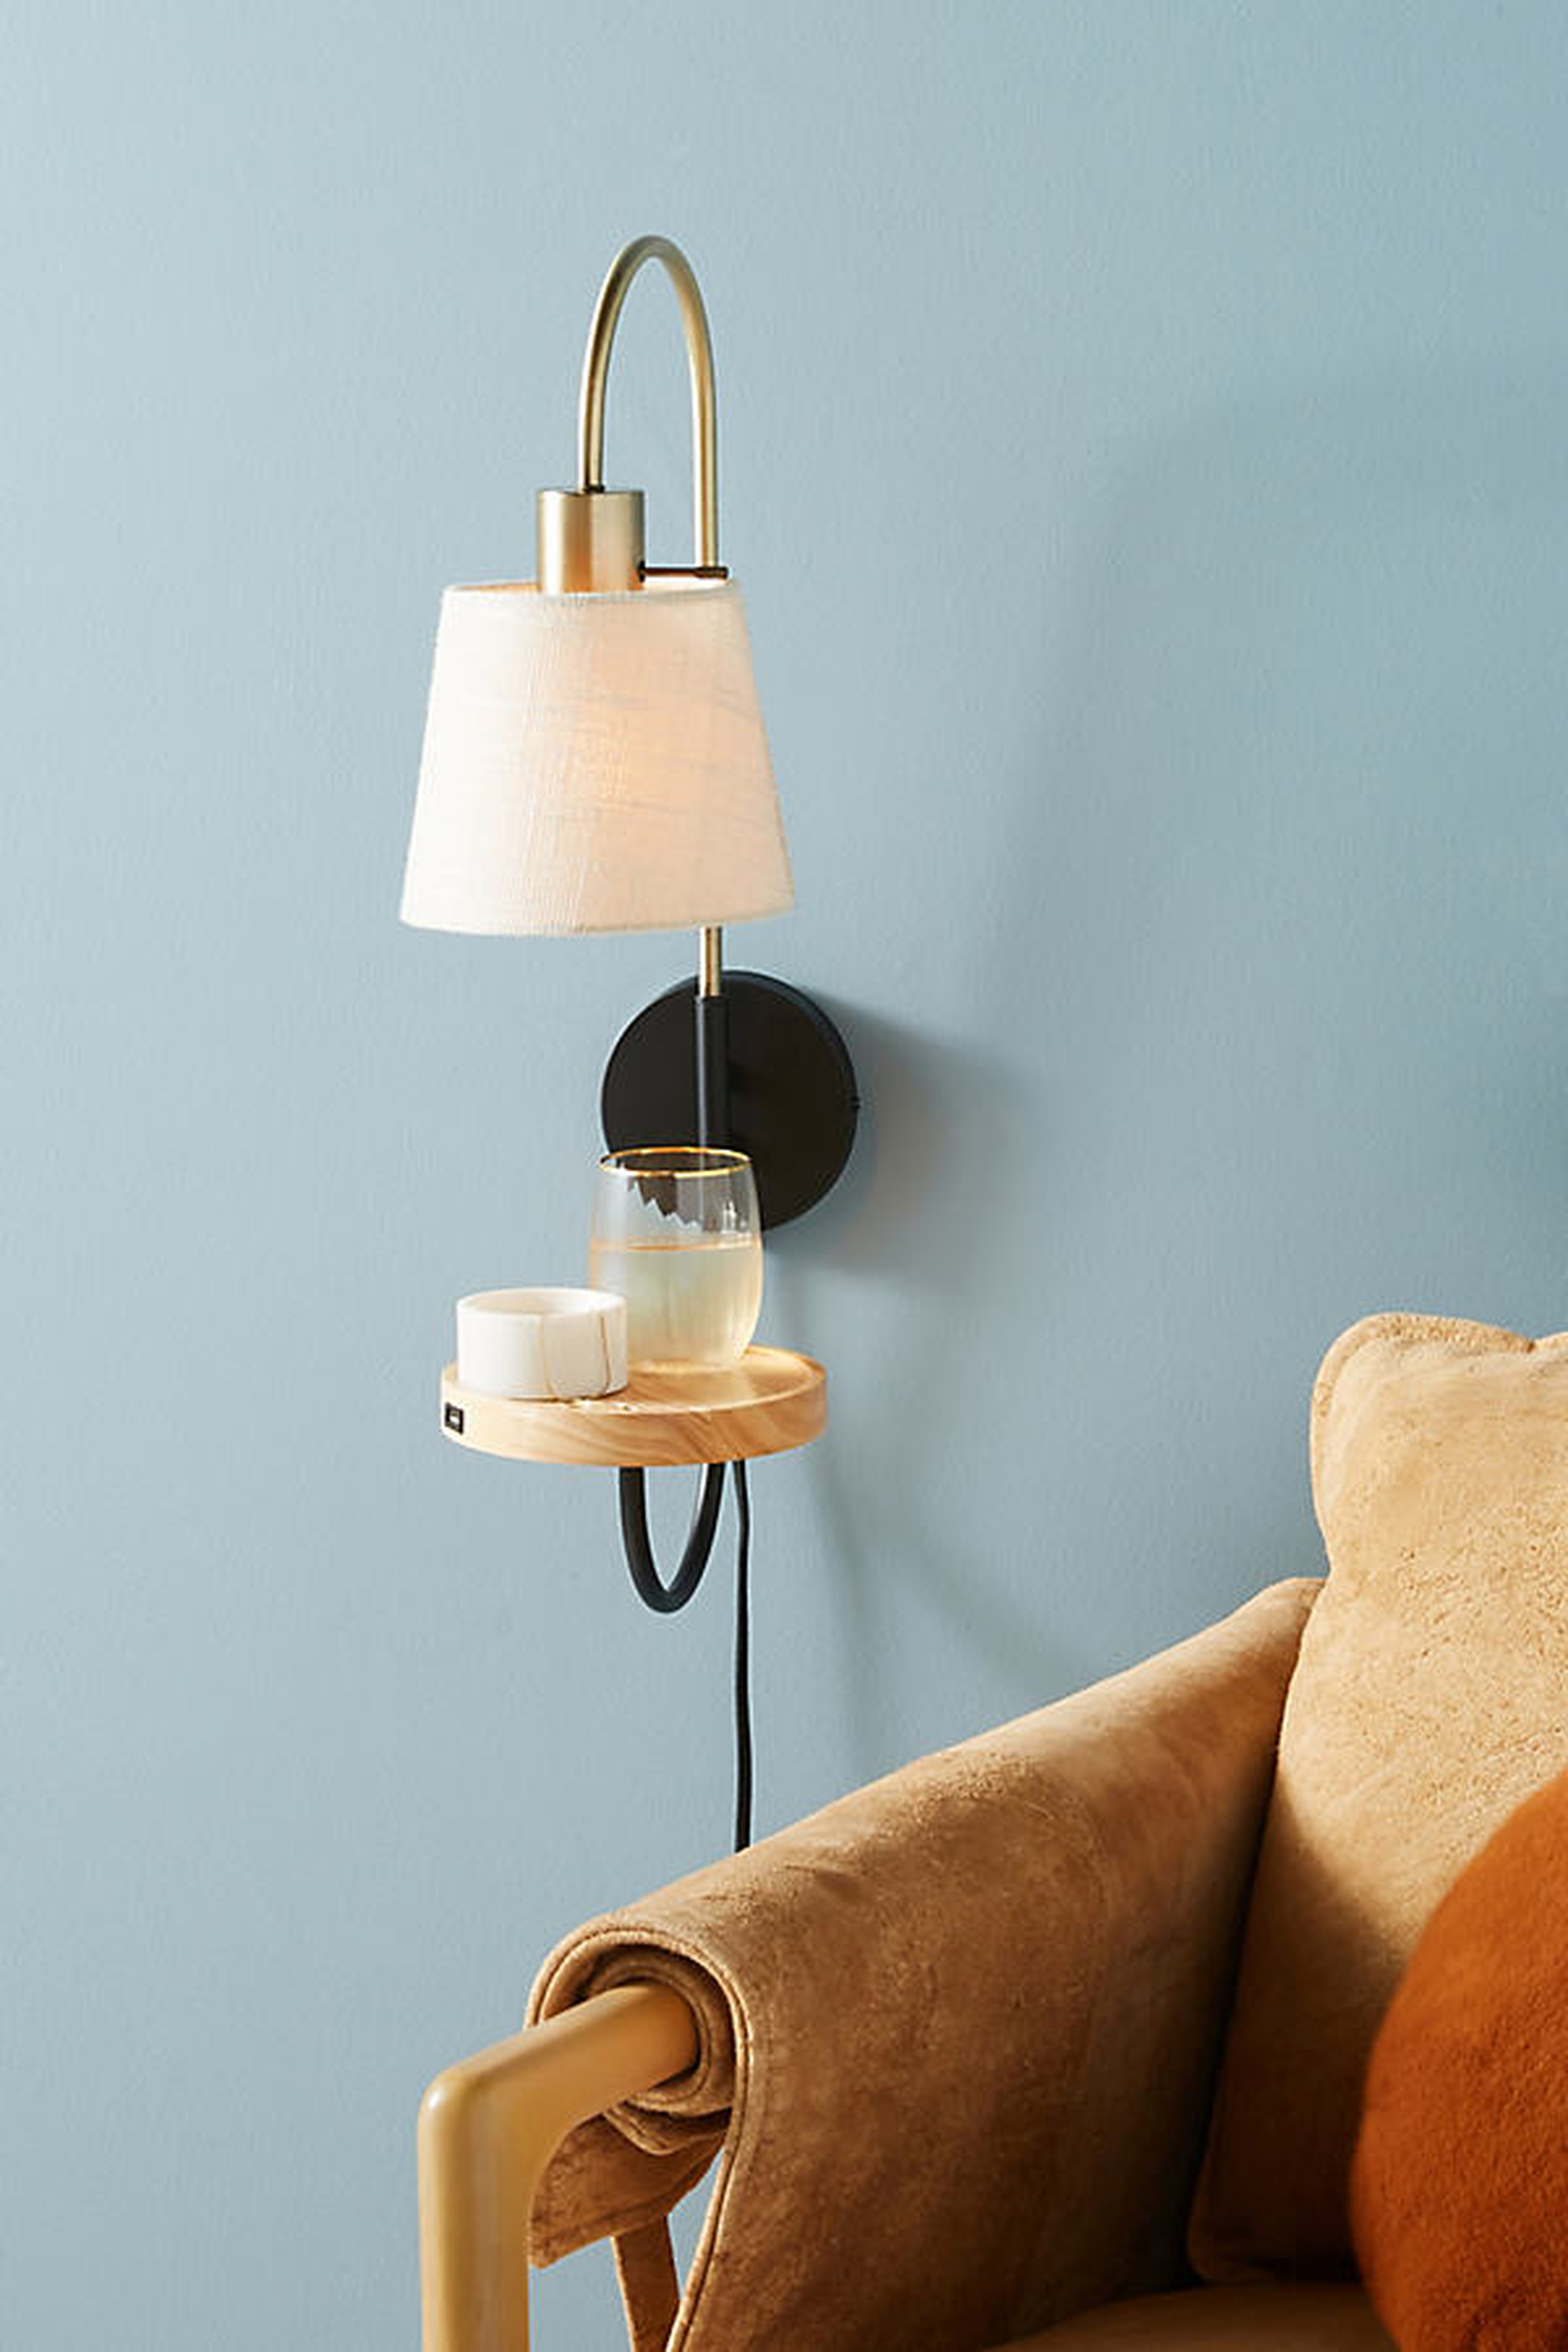 Jefford Sconce By Anthropologie in Black Size S - Anthropologie